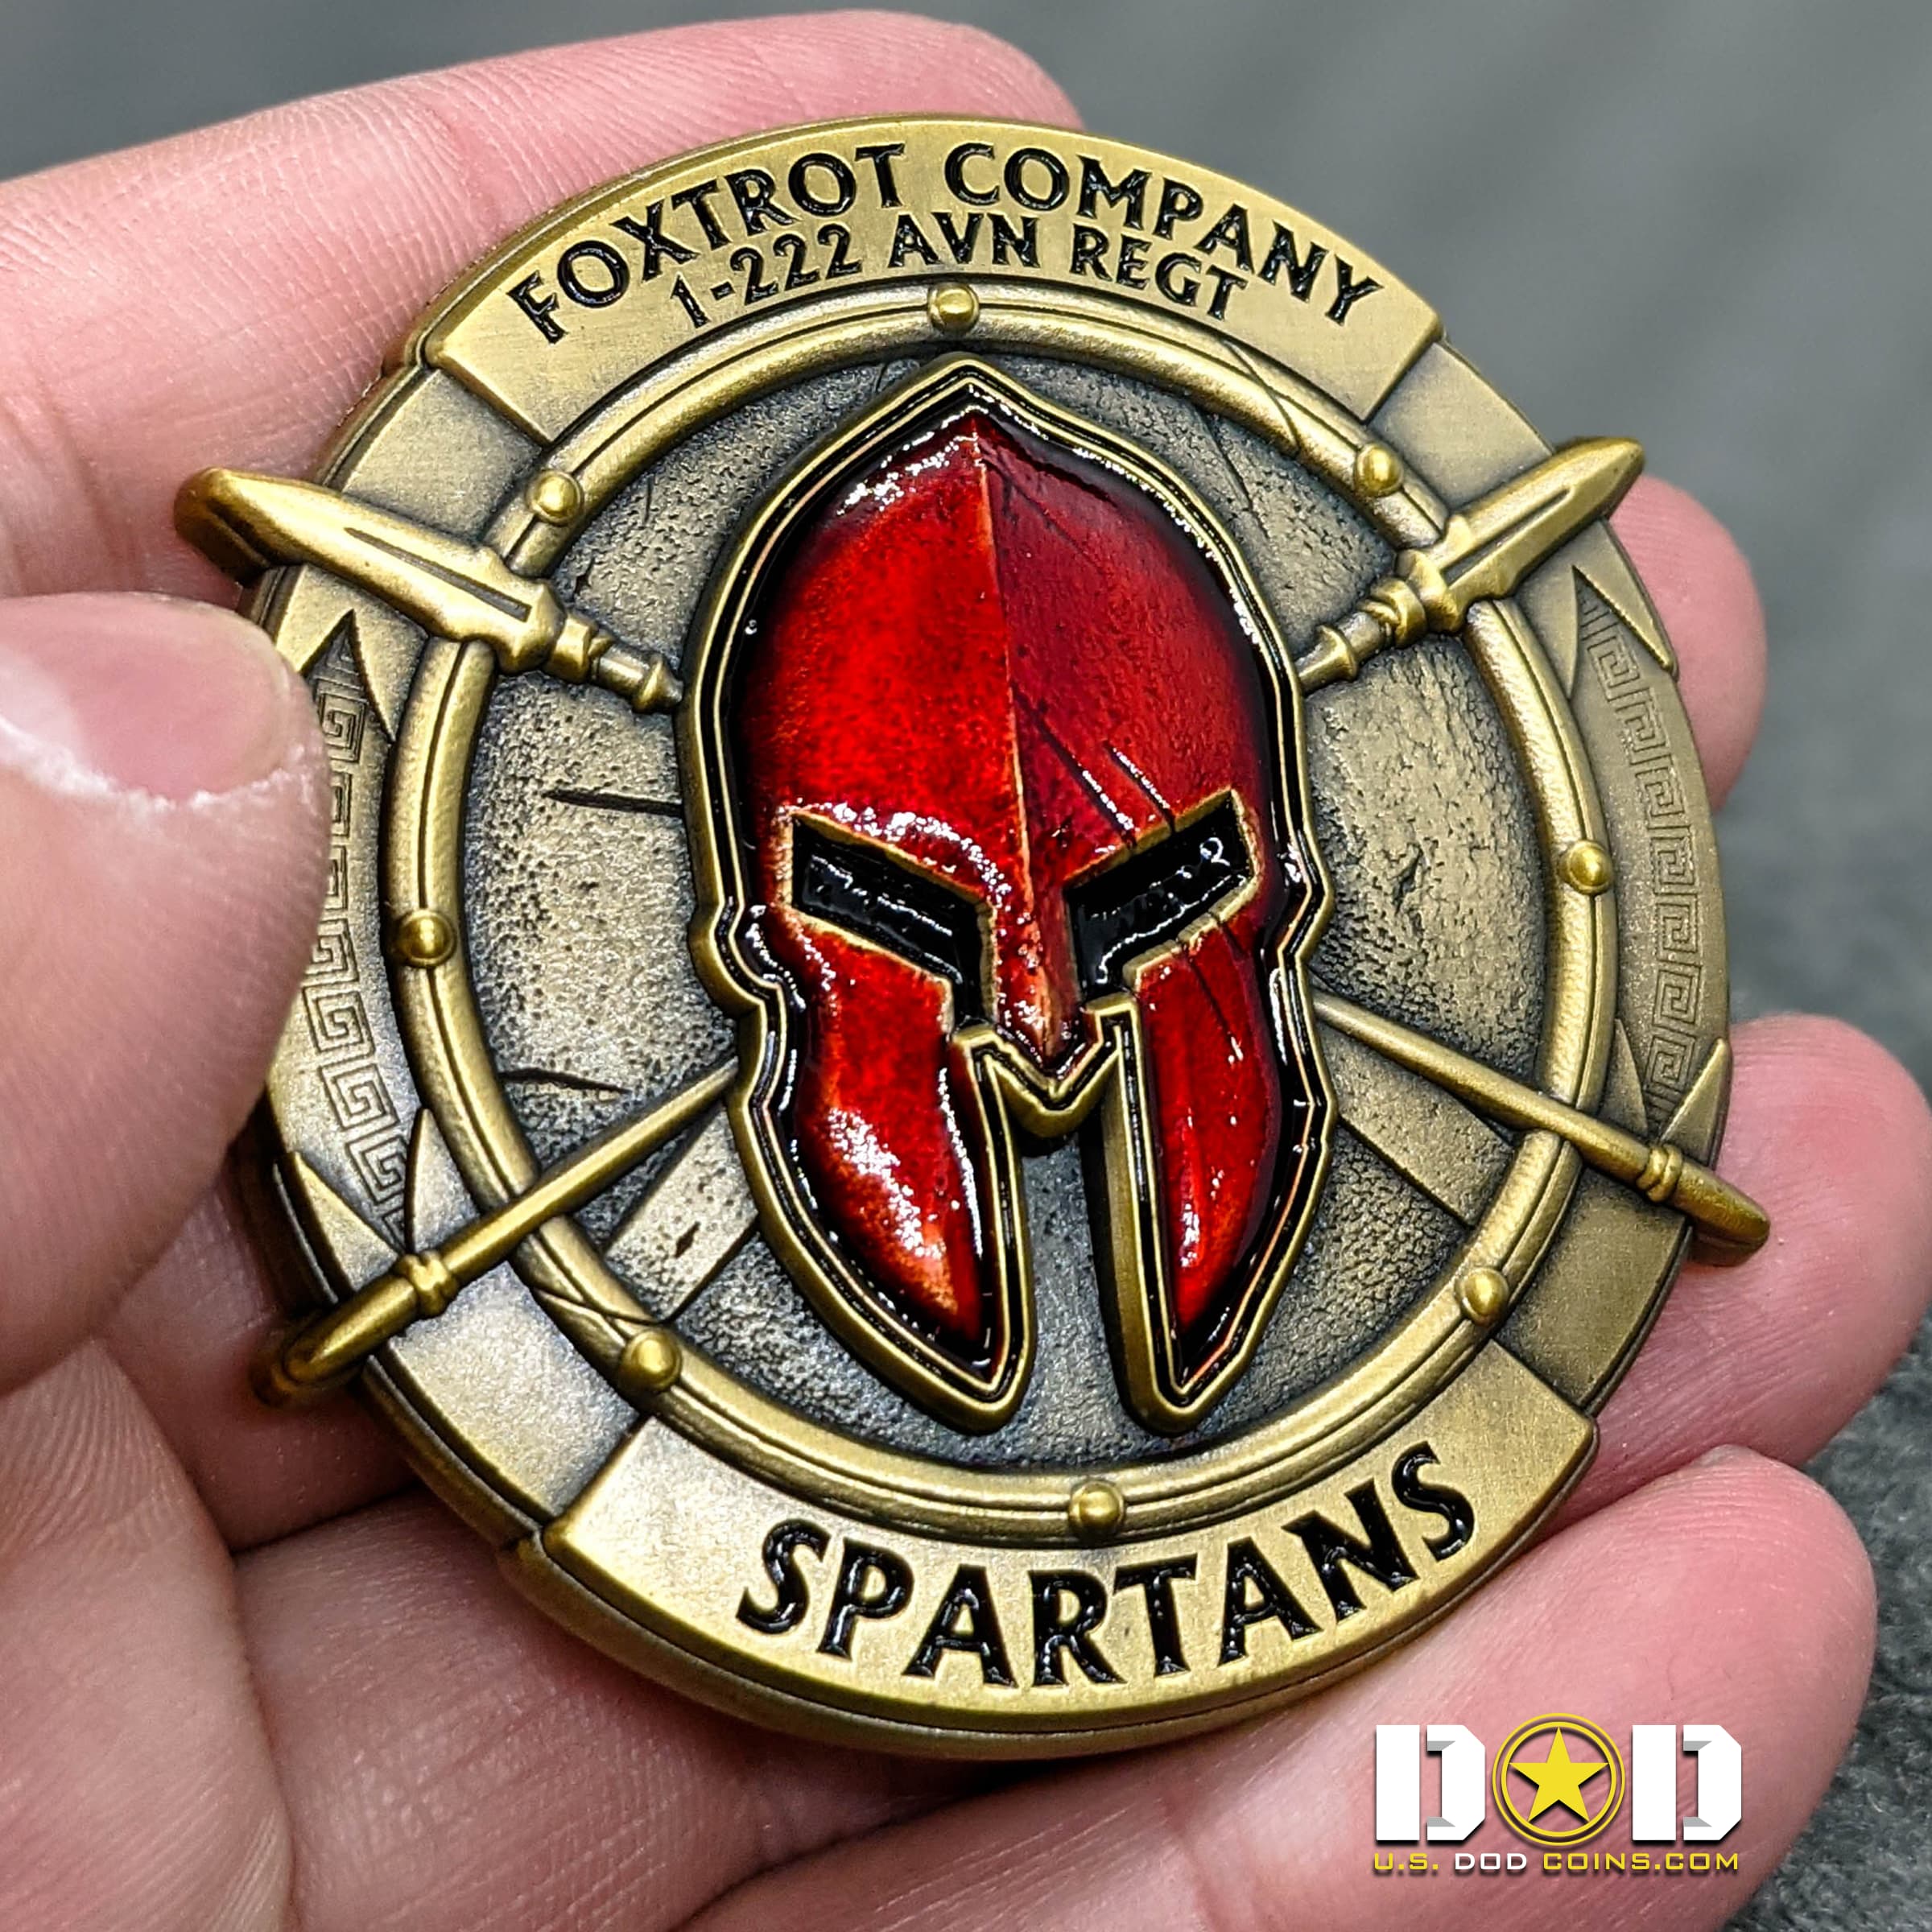 Foxtrot Company Spartan Challenge Coin 0003 USDODCoins Challenge Coins Examples 93 